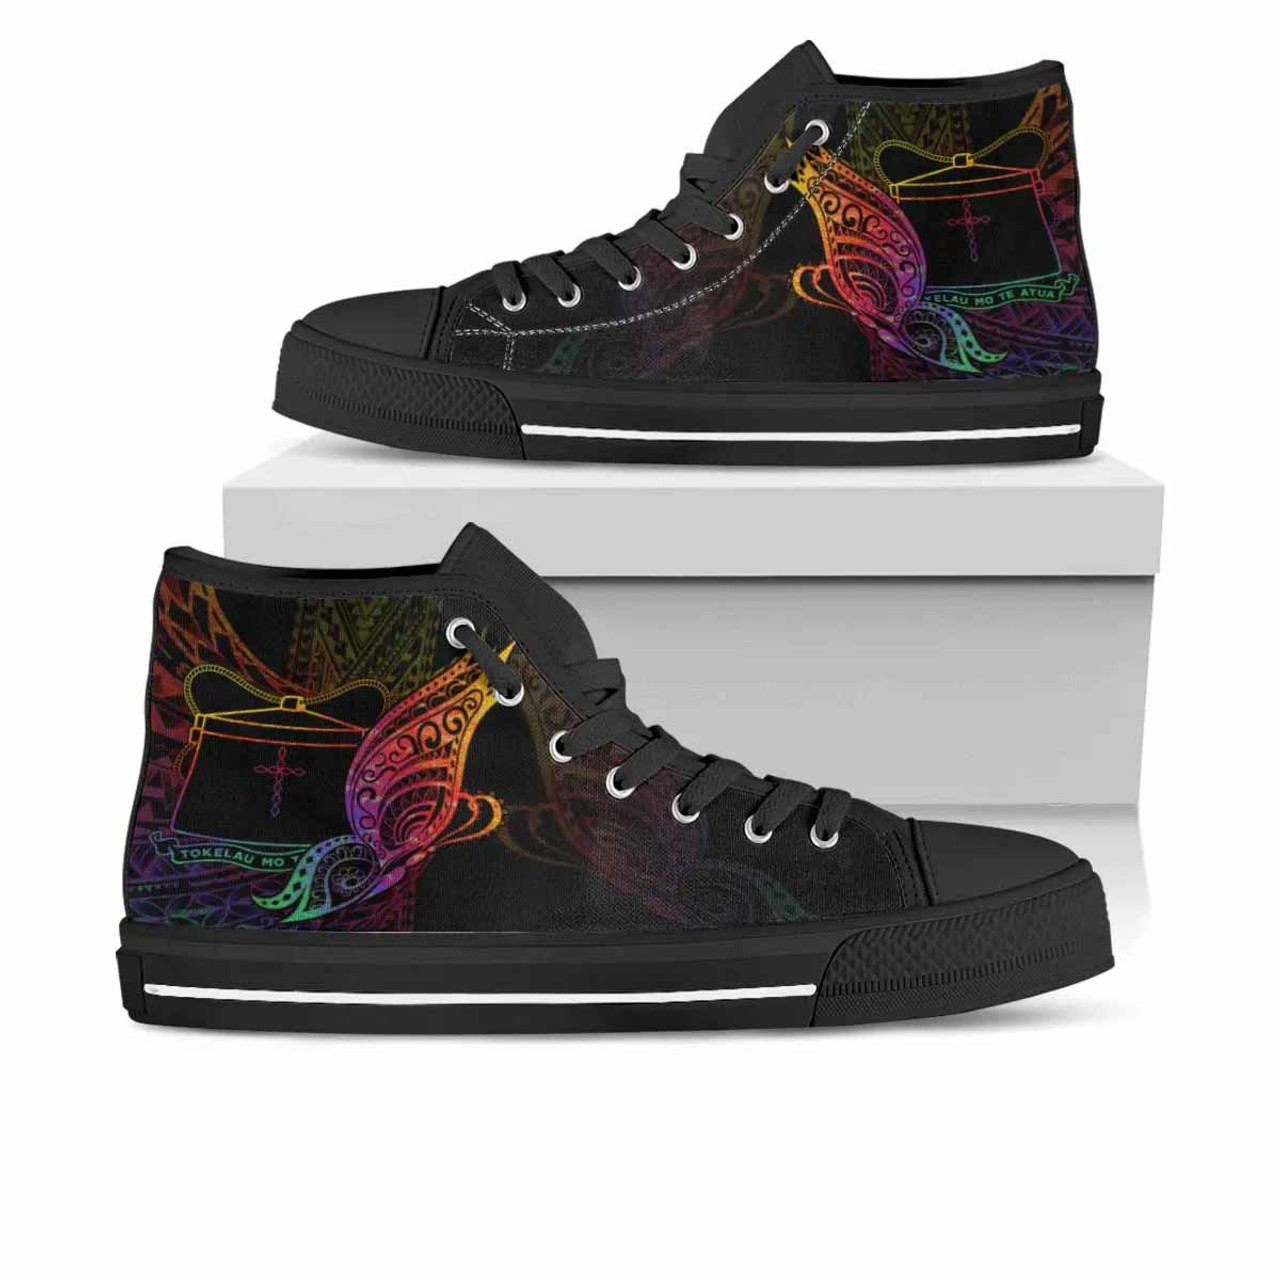 Tokelau High Top Shoes - Butterfly Polynesian Style 1